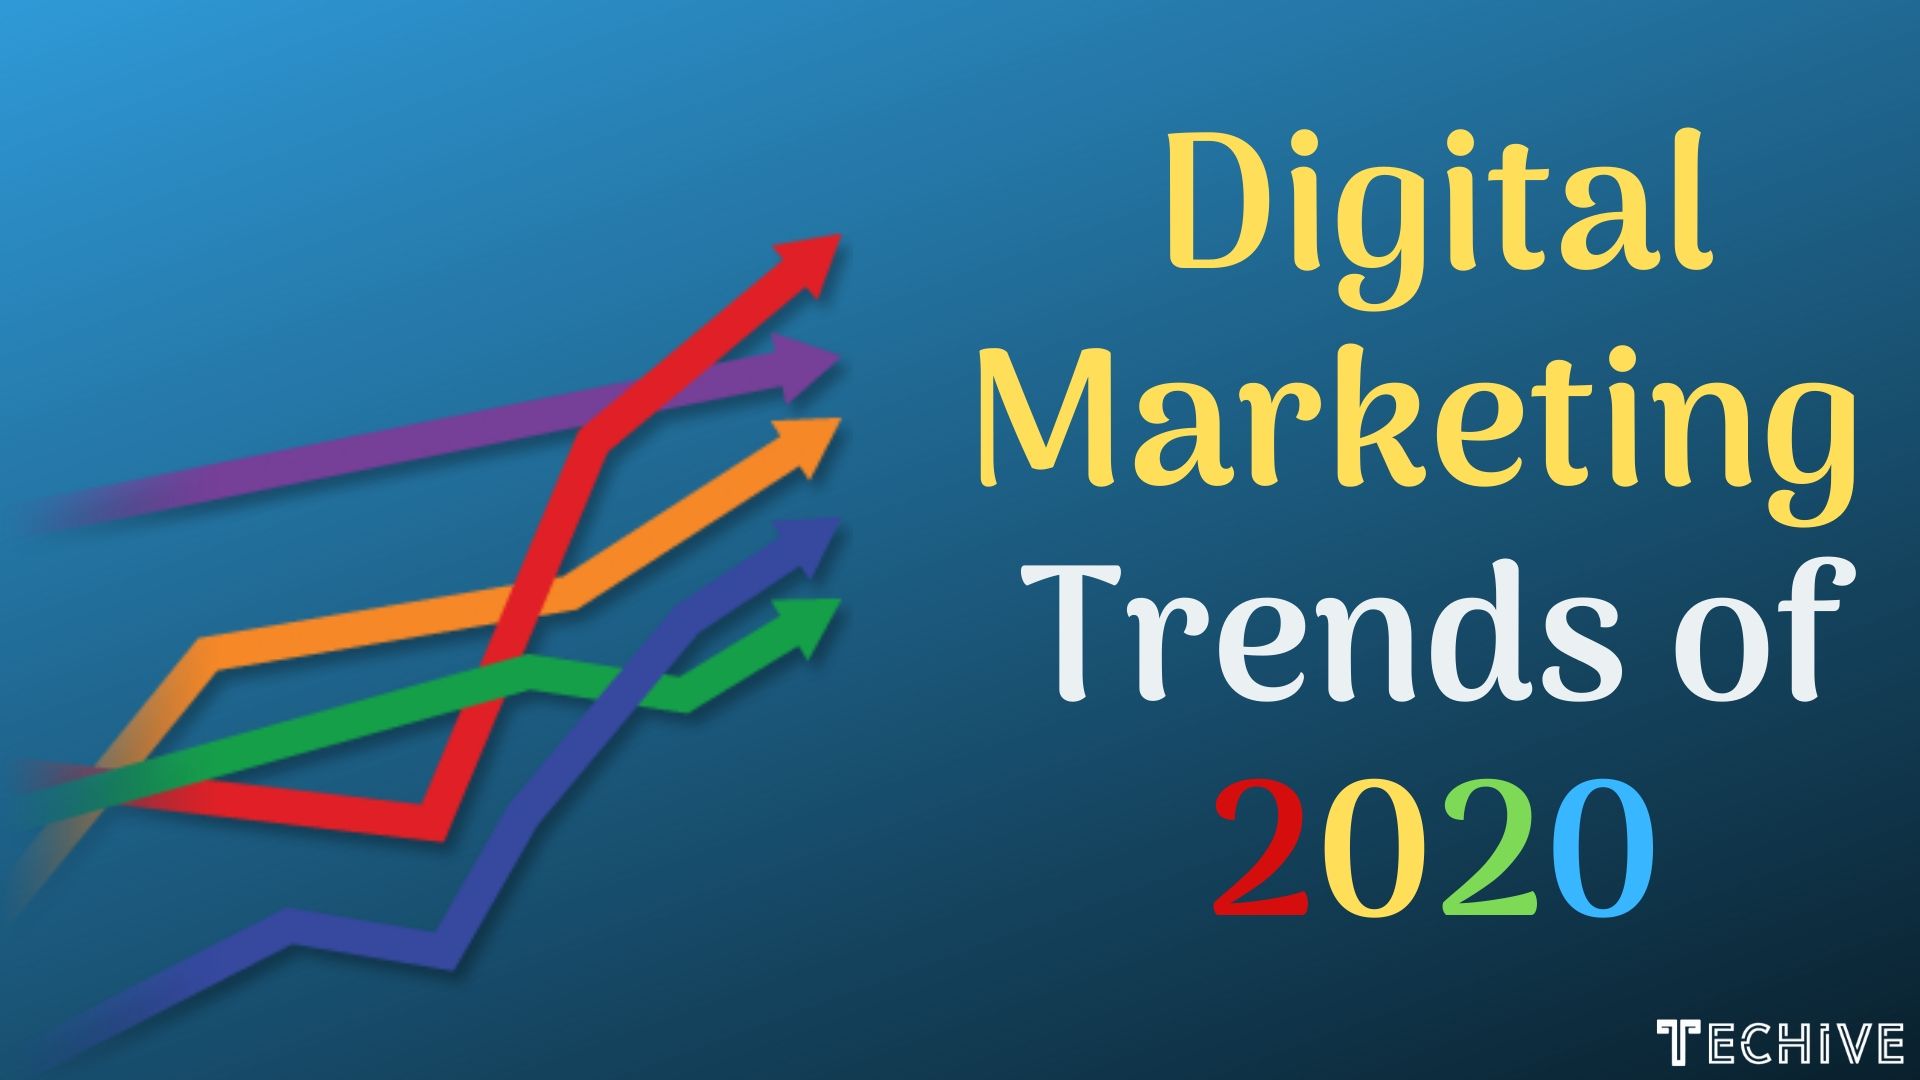 Digital Marketing Trends For The Year of 2020